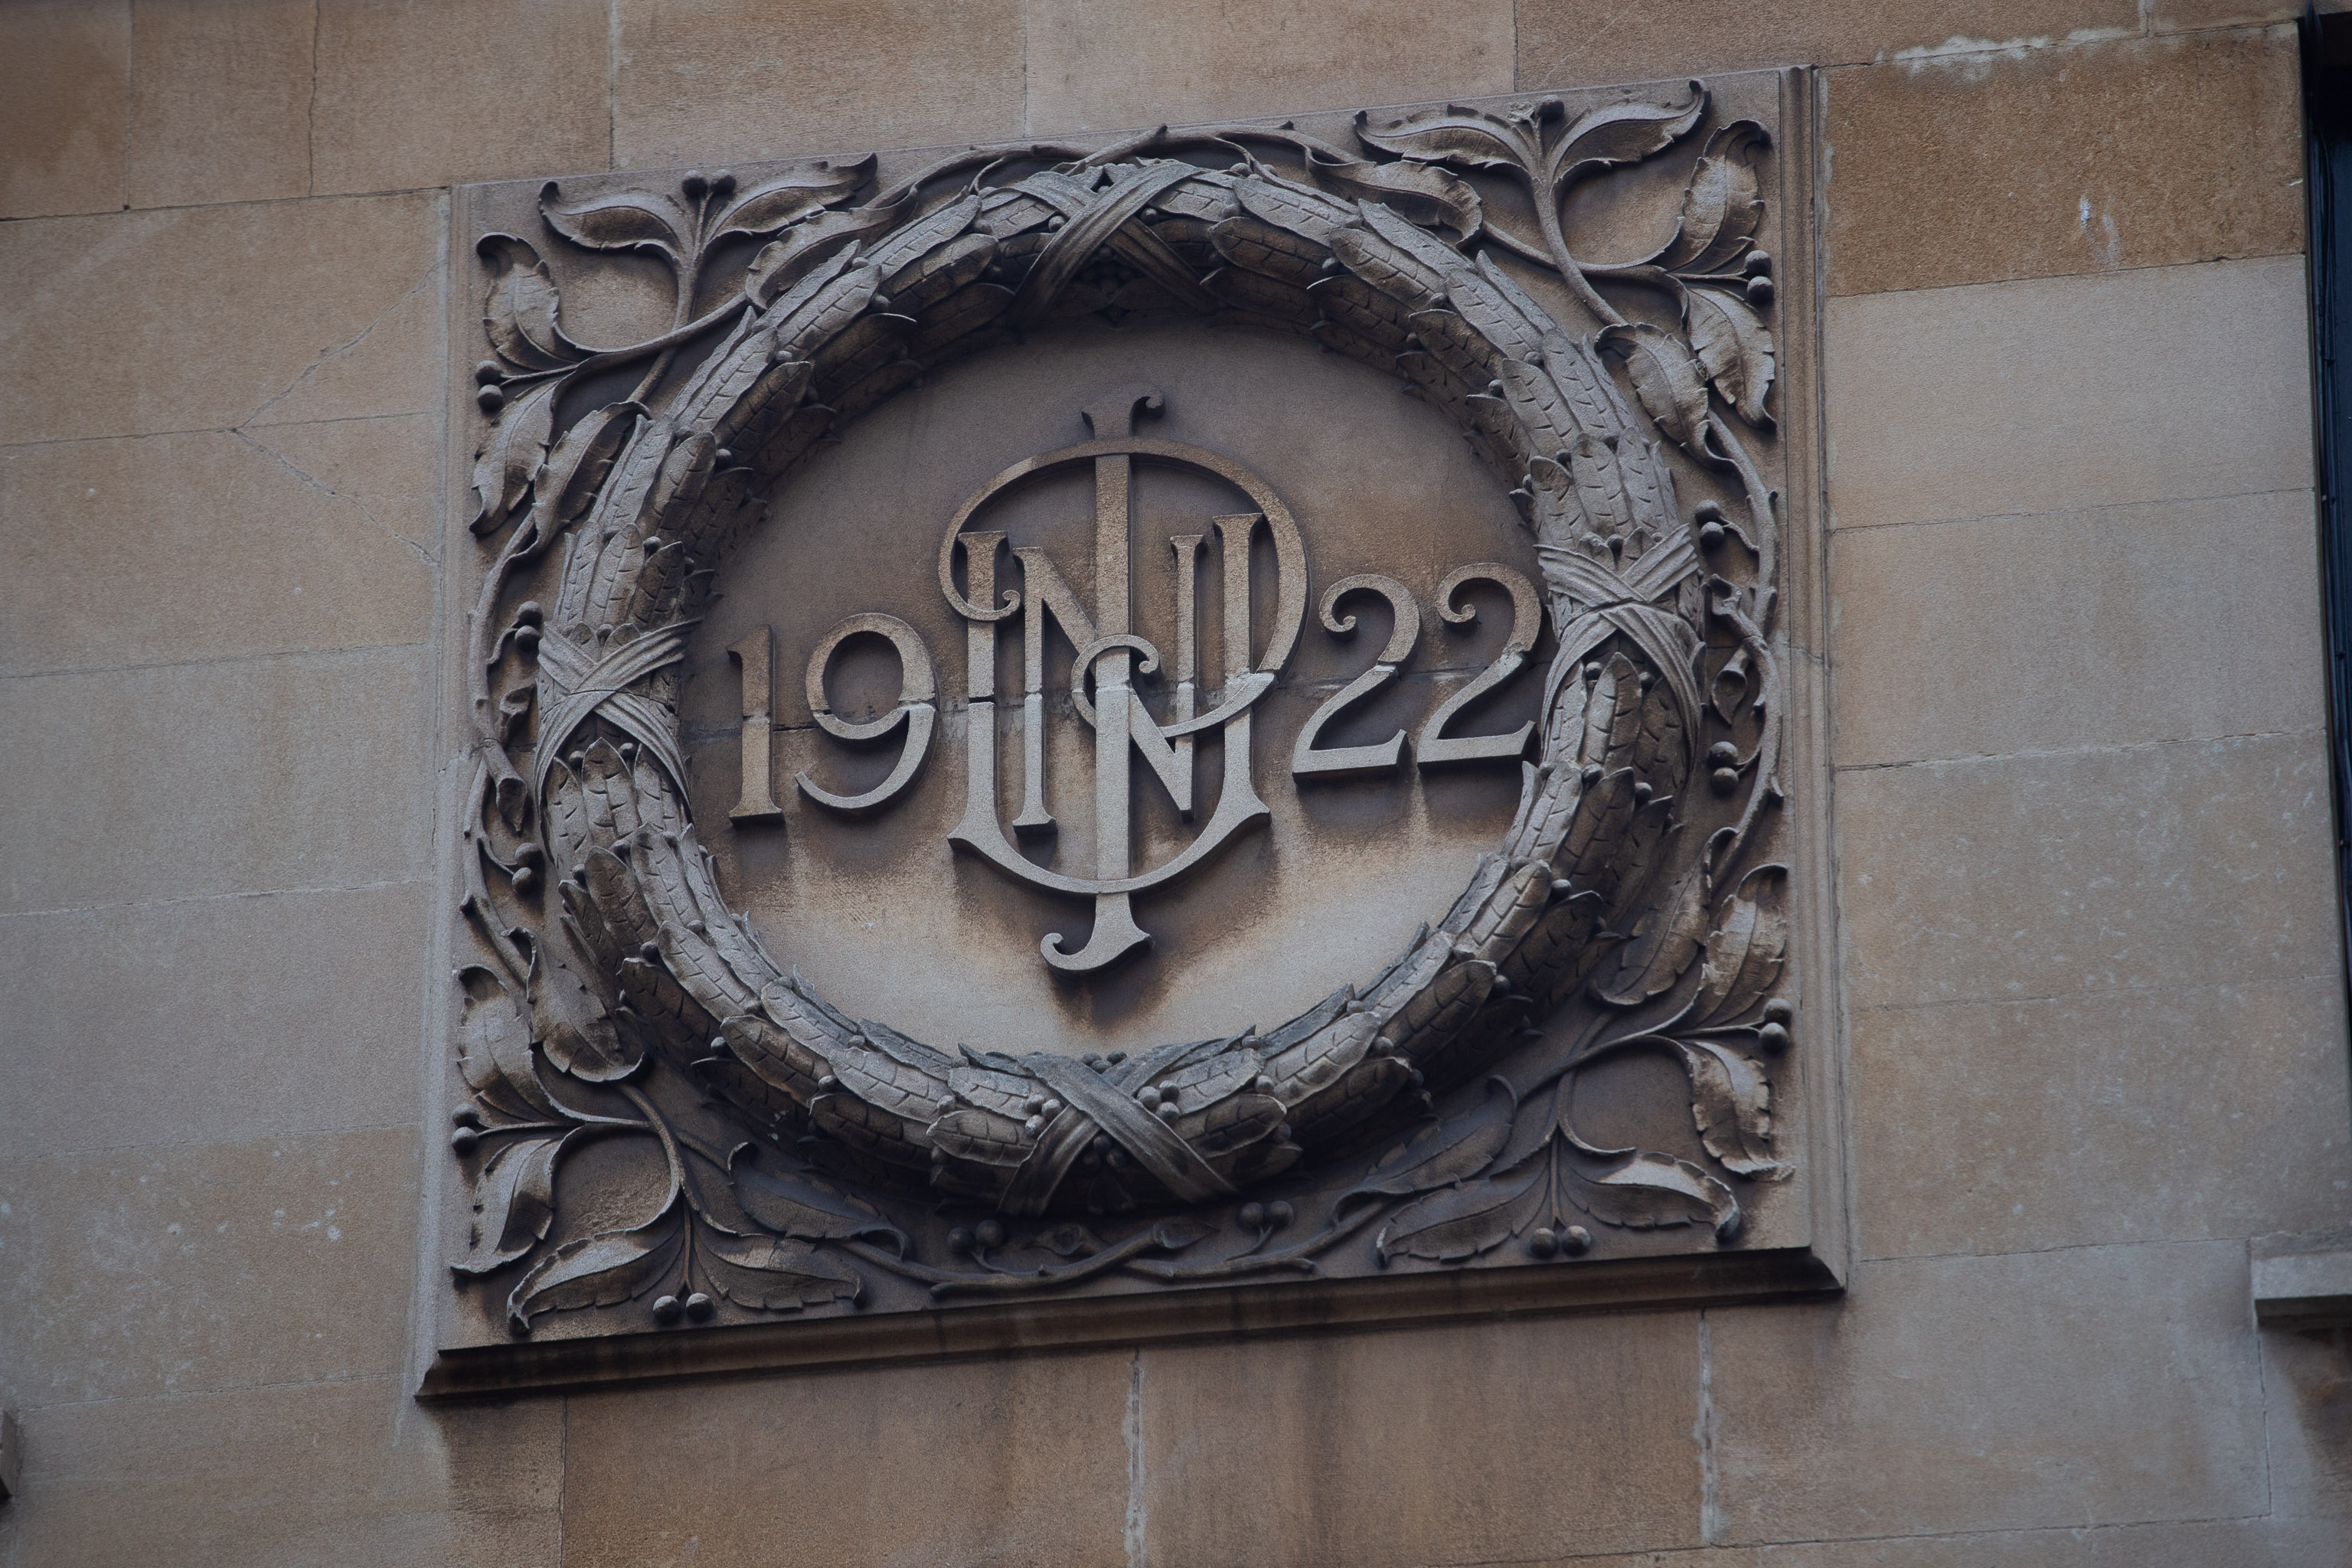 Monogram
Not sure whose initials those are, but this is The Ivy, Clifton, formely NatWest bank, on the corner of The Mall and Caledonia Place. The listing s...